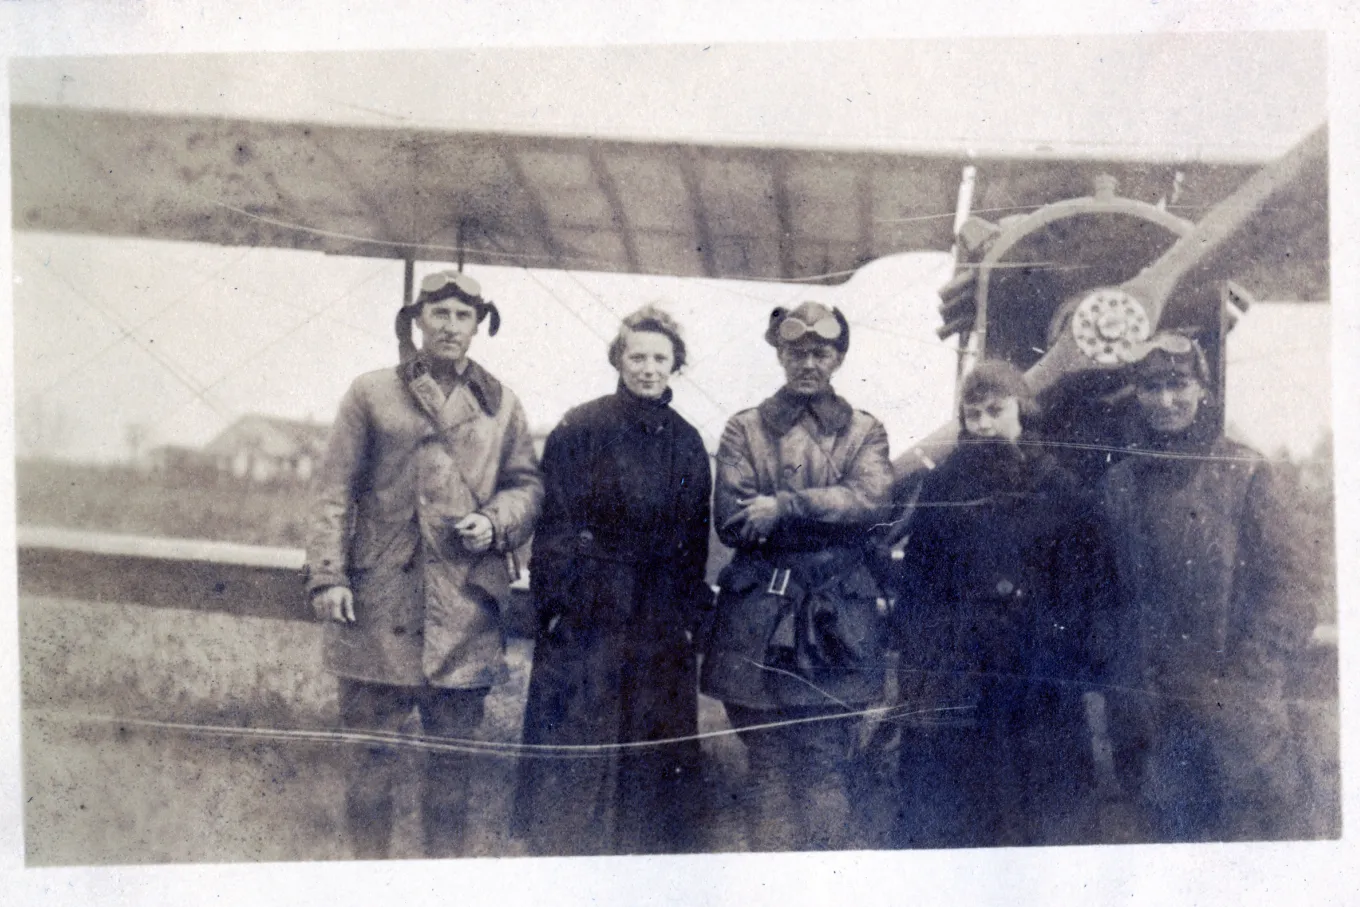 Lt. Pope, Mrs. Adams, Lt. Miller, Minnie Gosney, and Sgt. Fleming in front of airplane